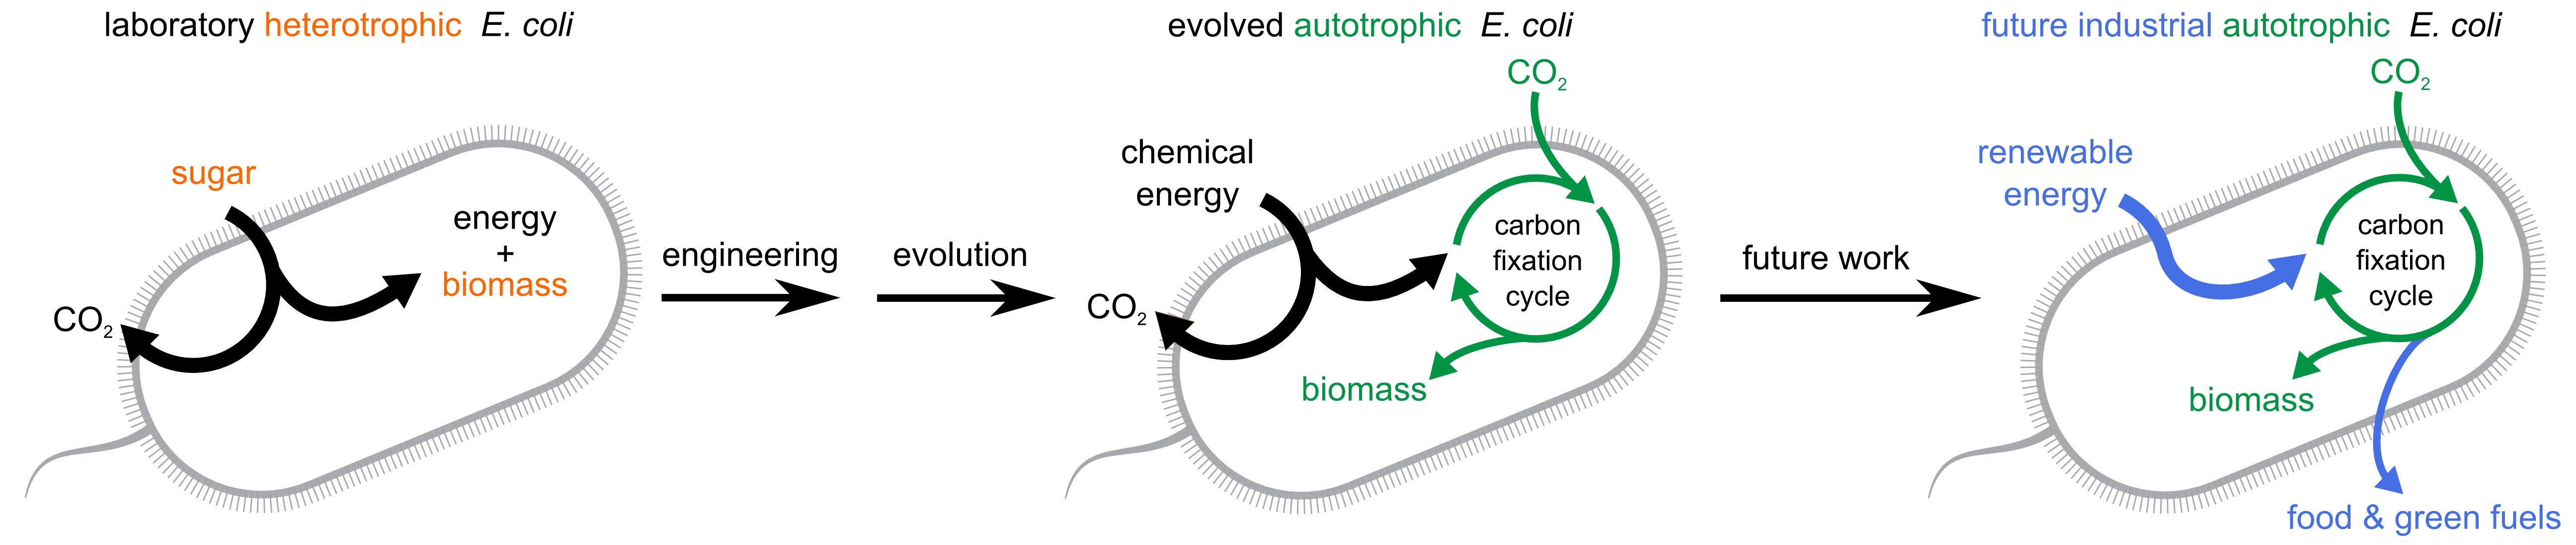 Heterotrophic E. coli (left) produce biomass from sugar, but lab-evolved autotrophic E. coli from the new study (center) use CO2 instead. The authors envision autotrophic E. coli that use renewable energy and have no net carbon emissions in the future (right).